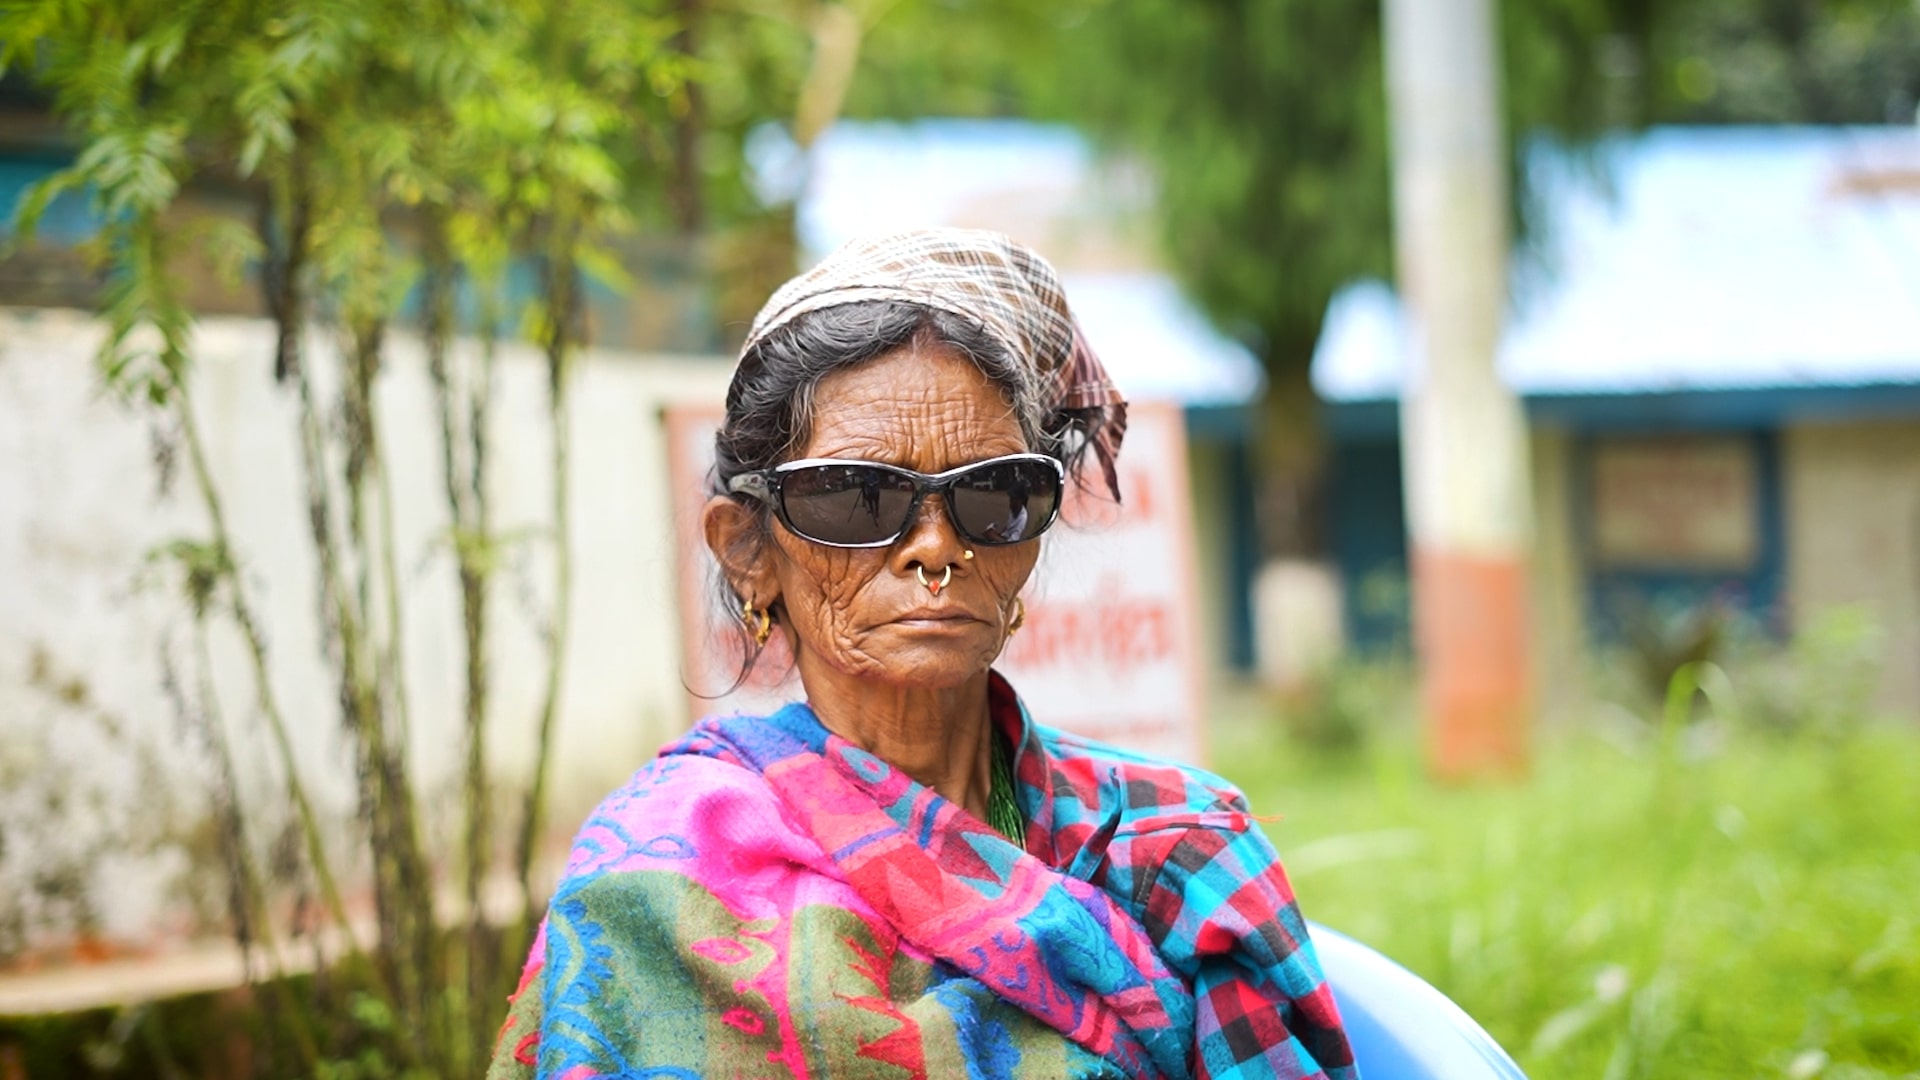 Cataract Blindness Alleviation Project in priority areas of all provinces of Nepal